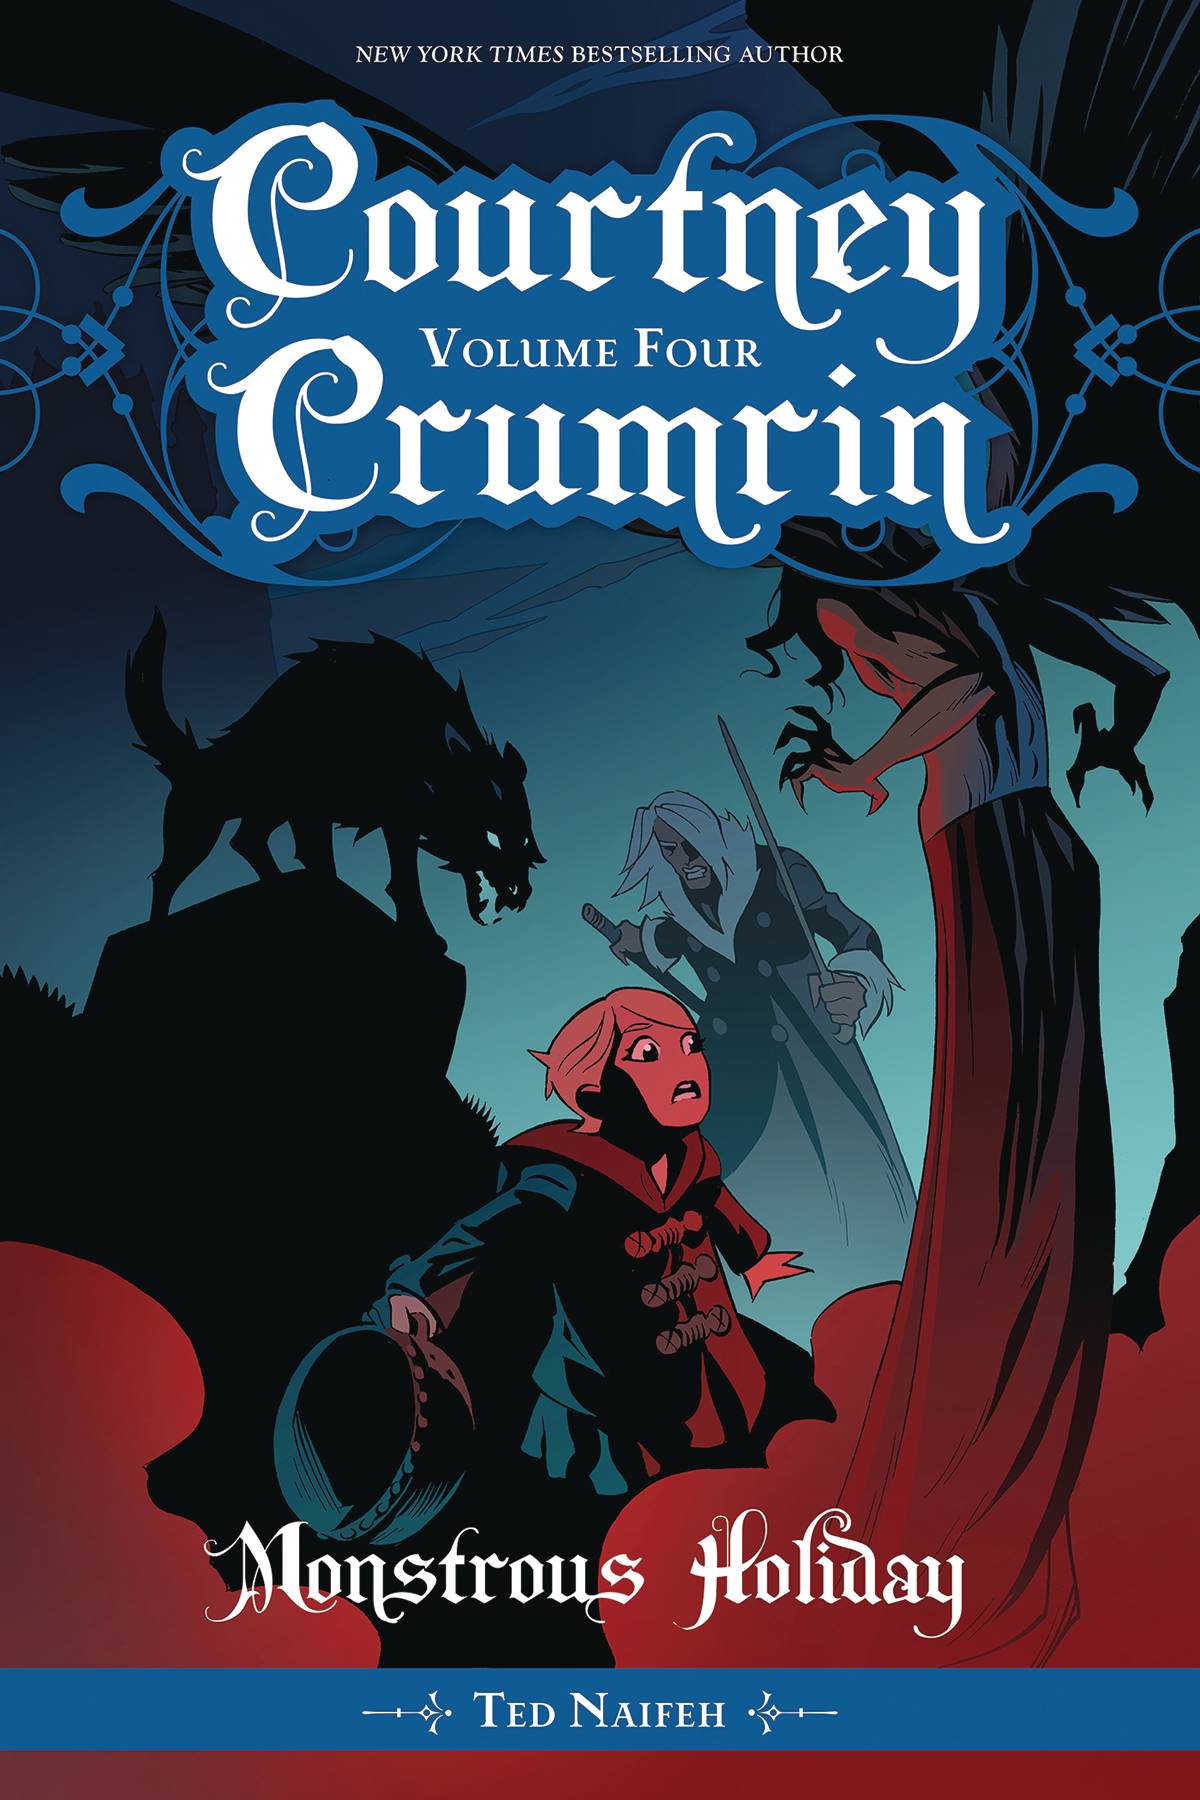 Courtney Crumrin Graphic Novel Volume 4 Monstrous Holiday